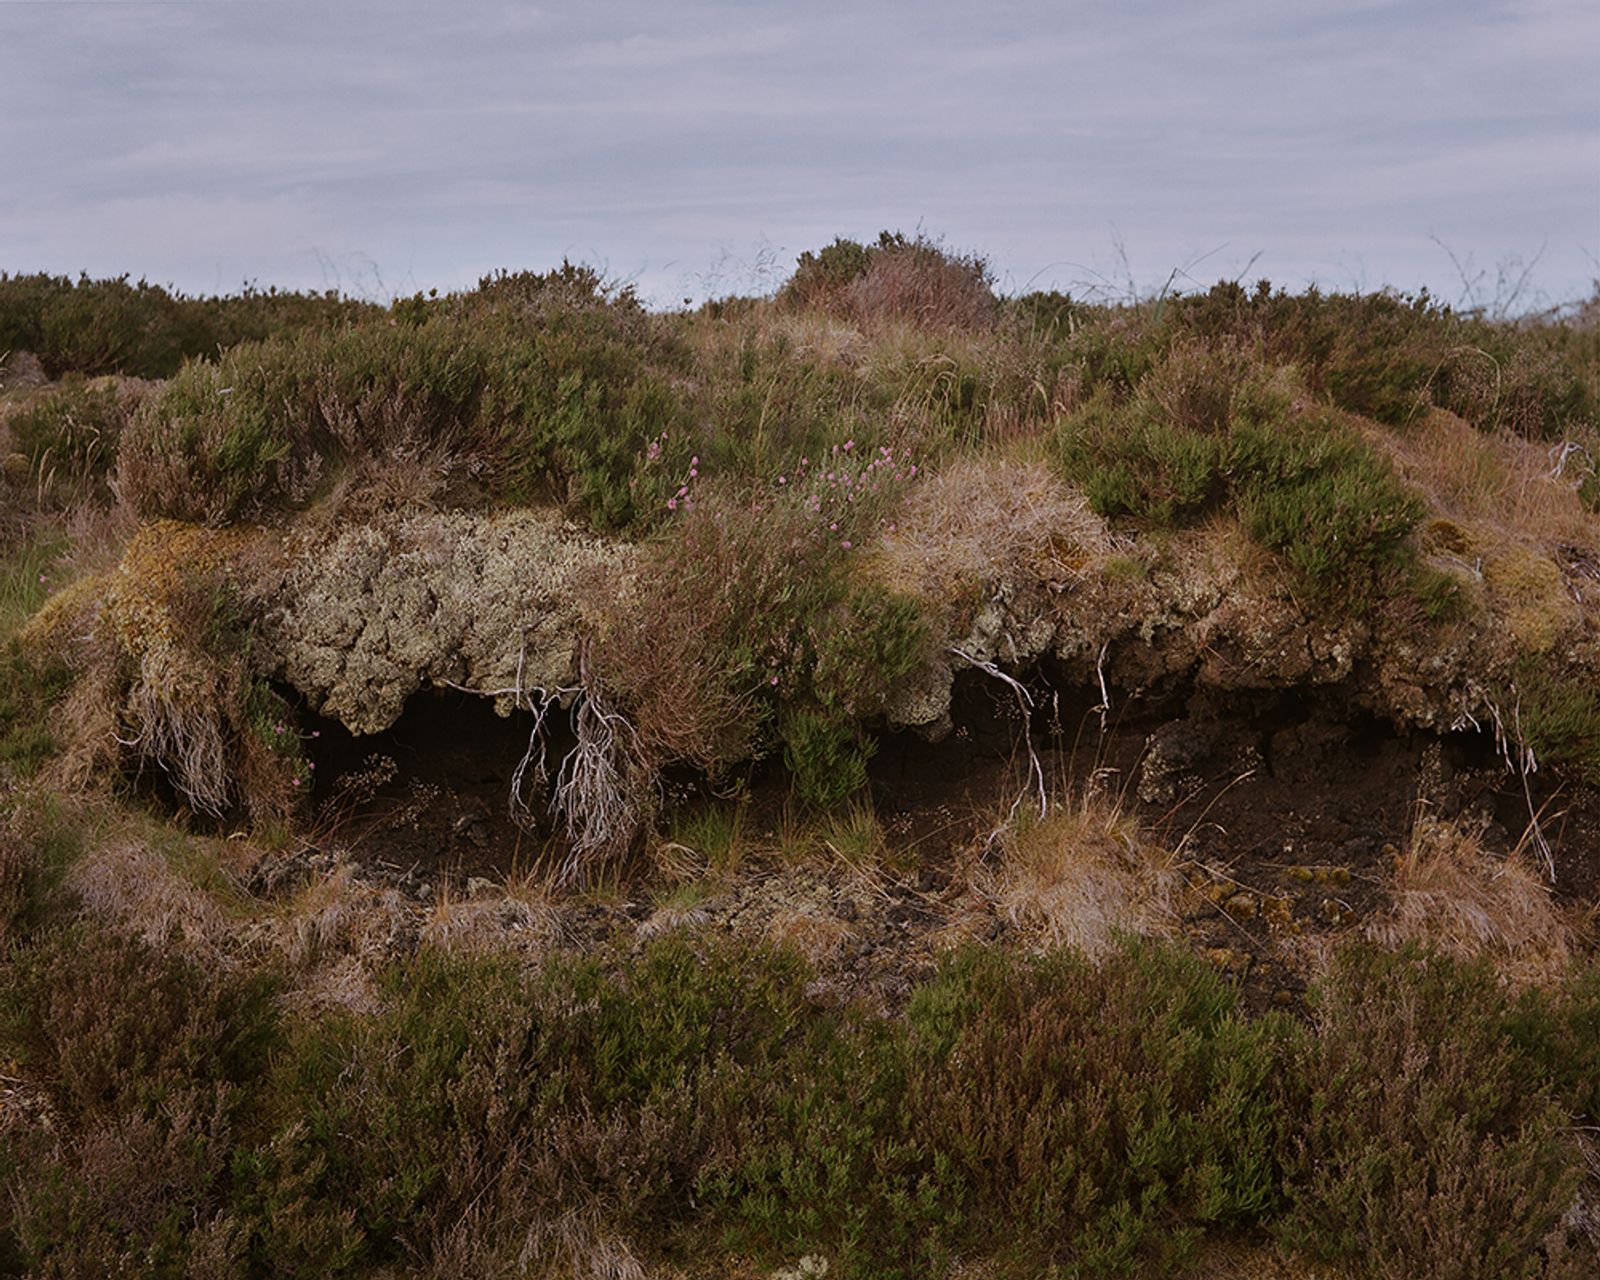 © Sophie Gerrard - Peat cross section, from the series 'The Flows'